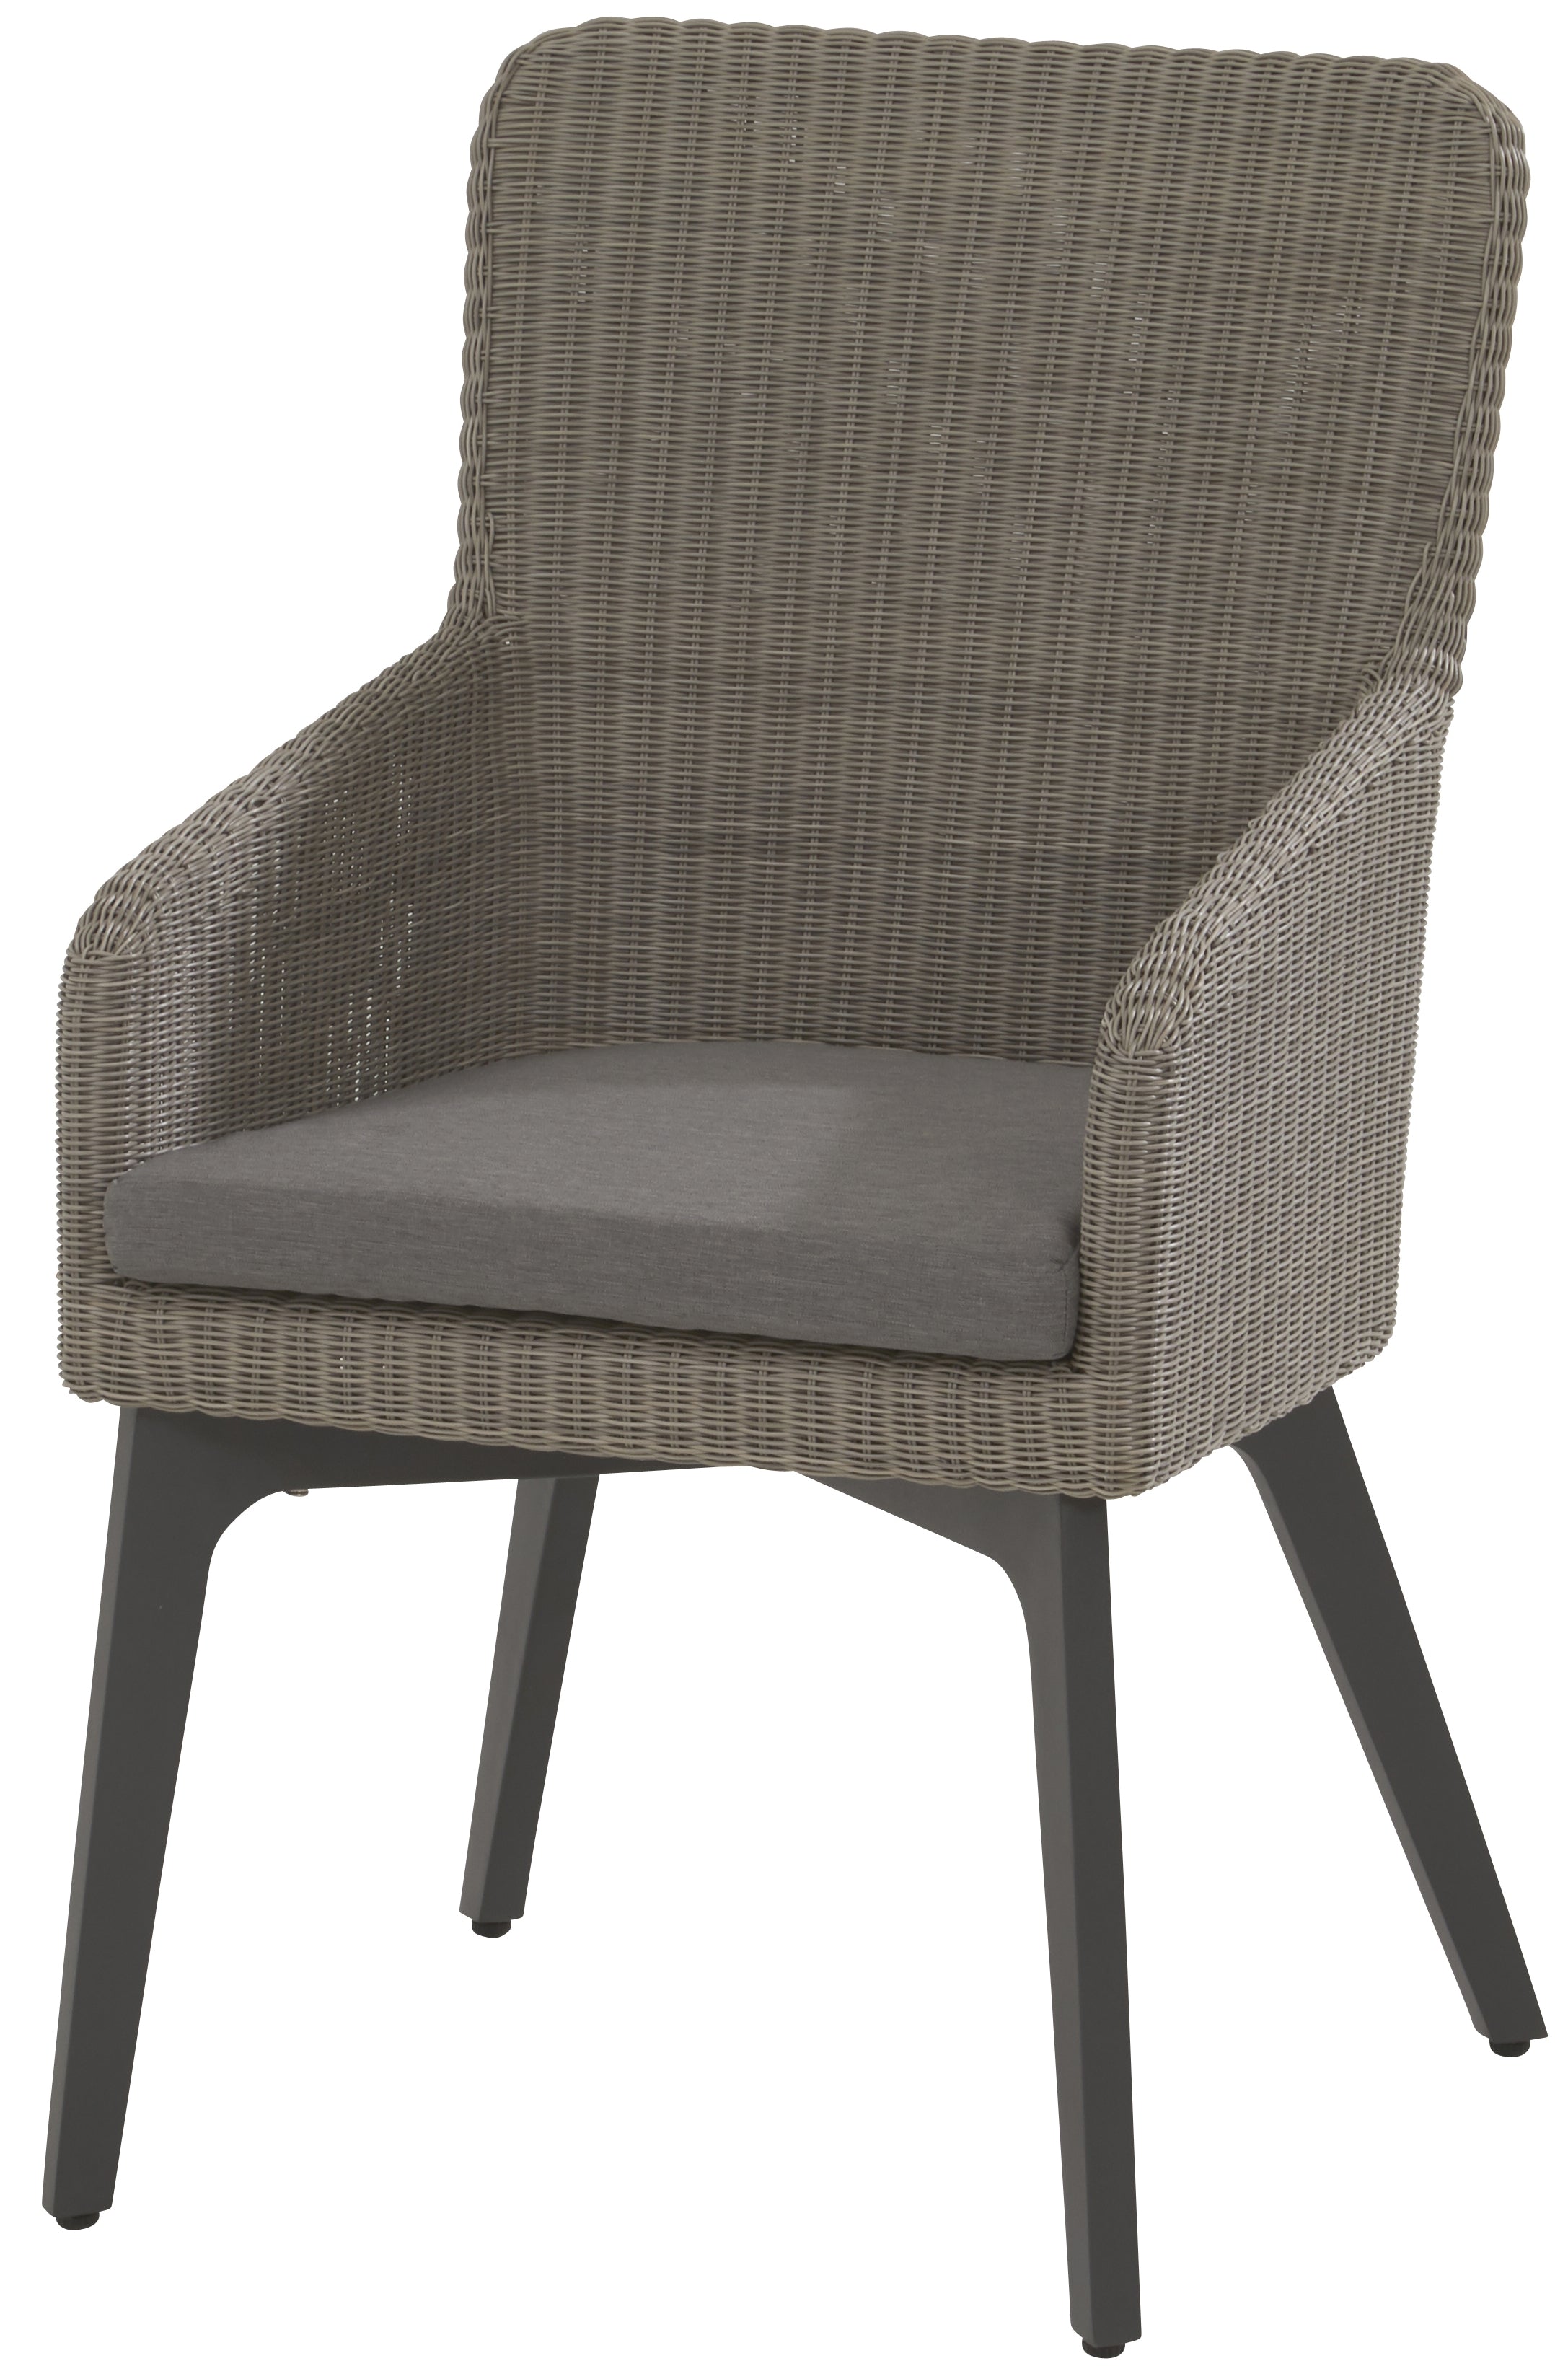 4 Seasons Outdoor Luxor Dining Chair Alu Legs With Cushion